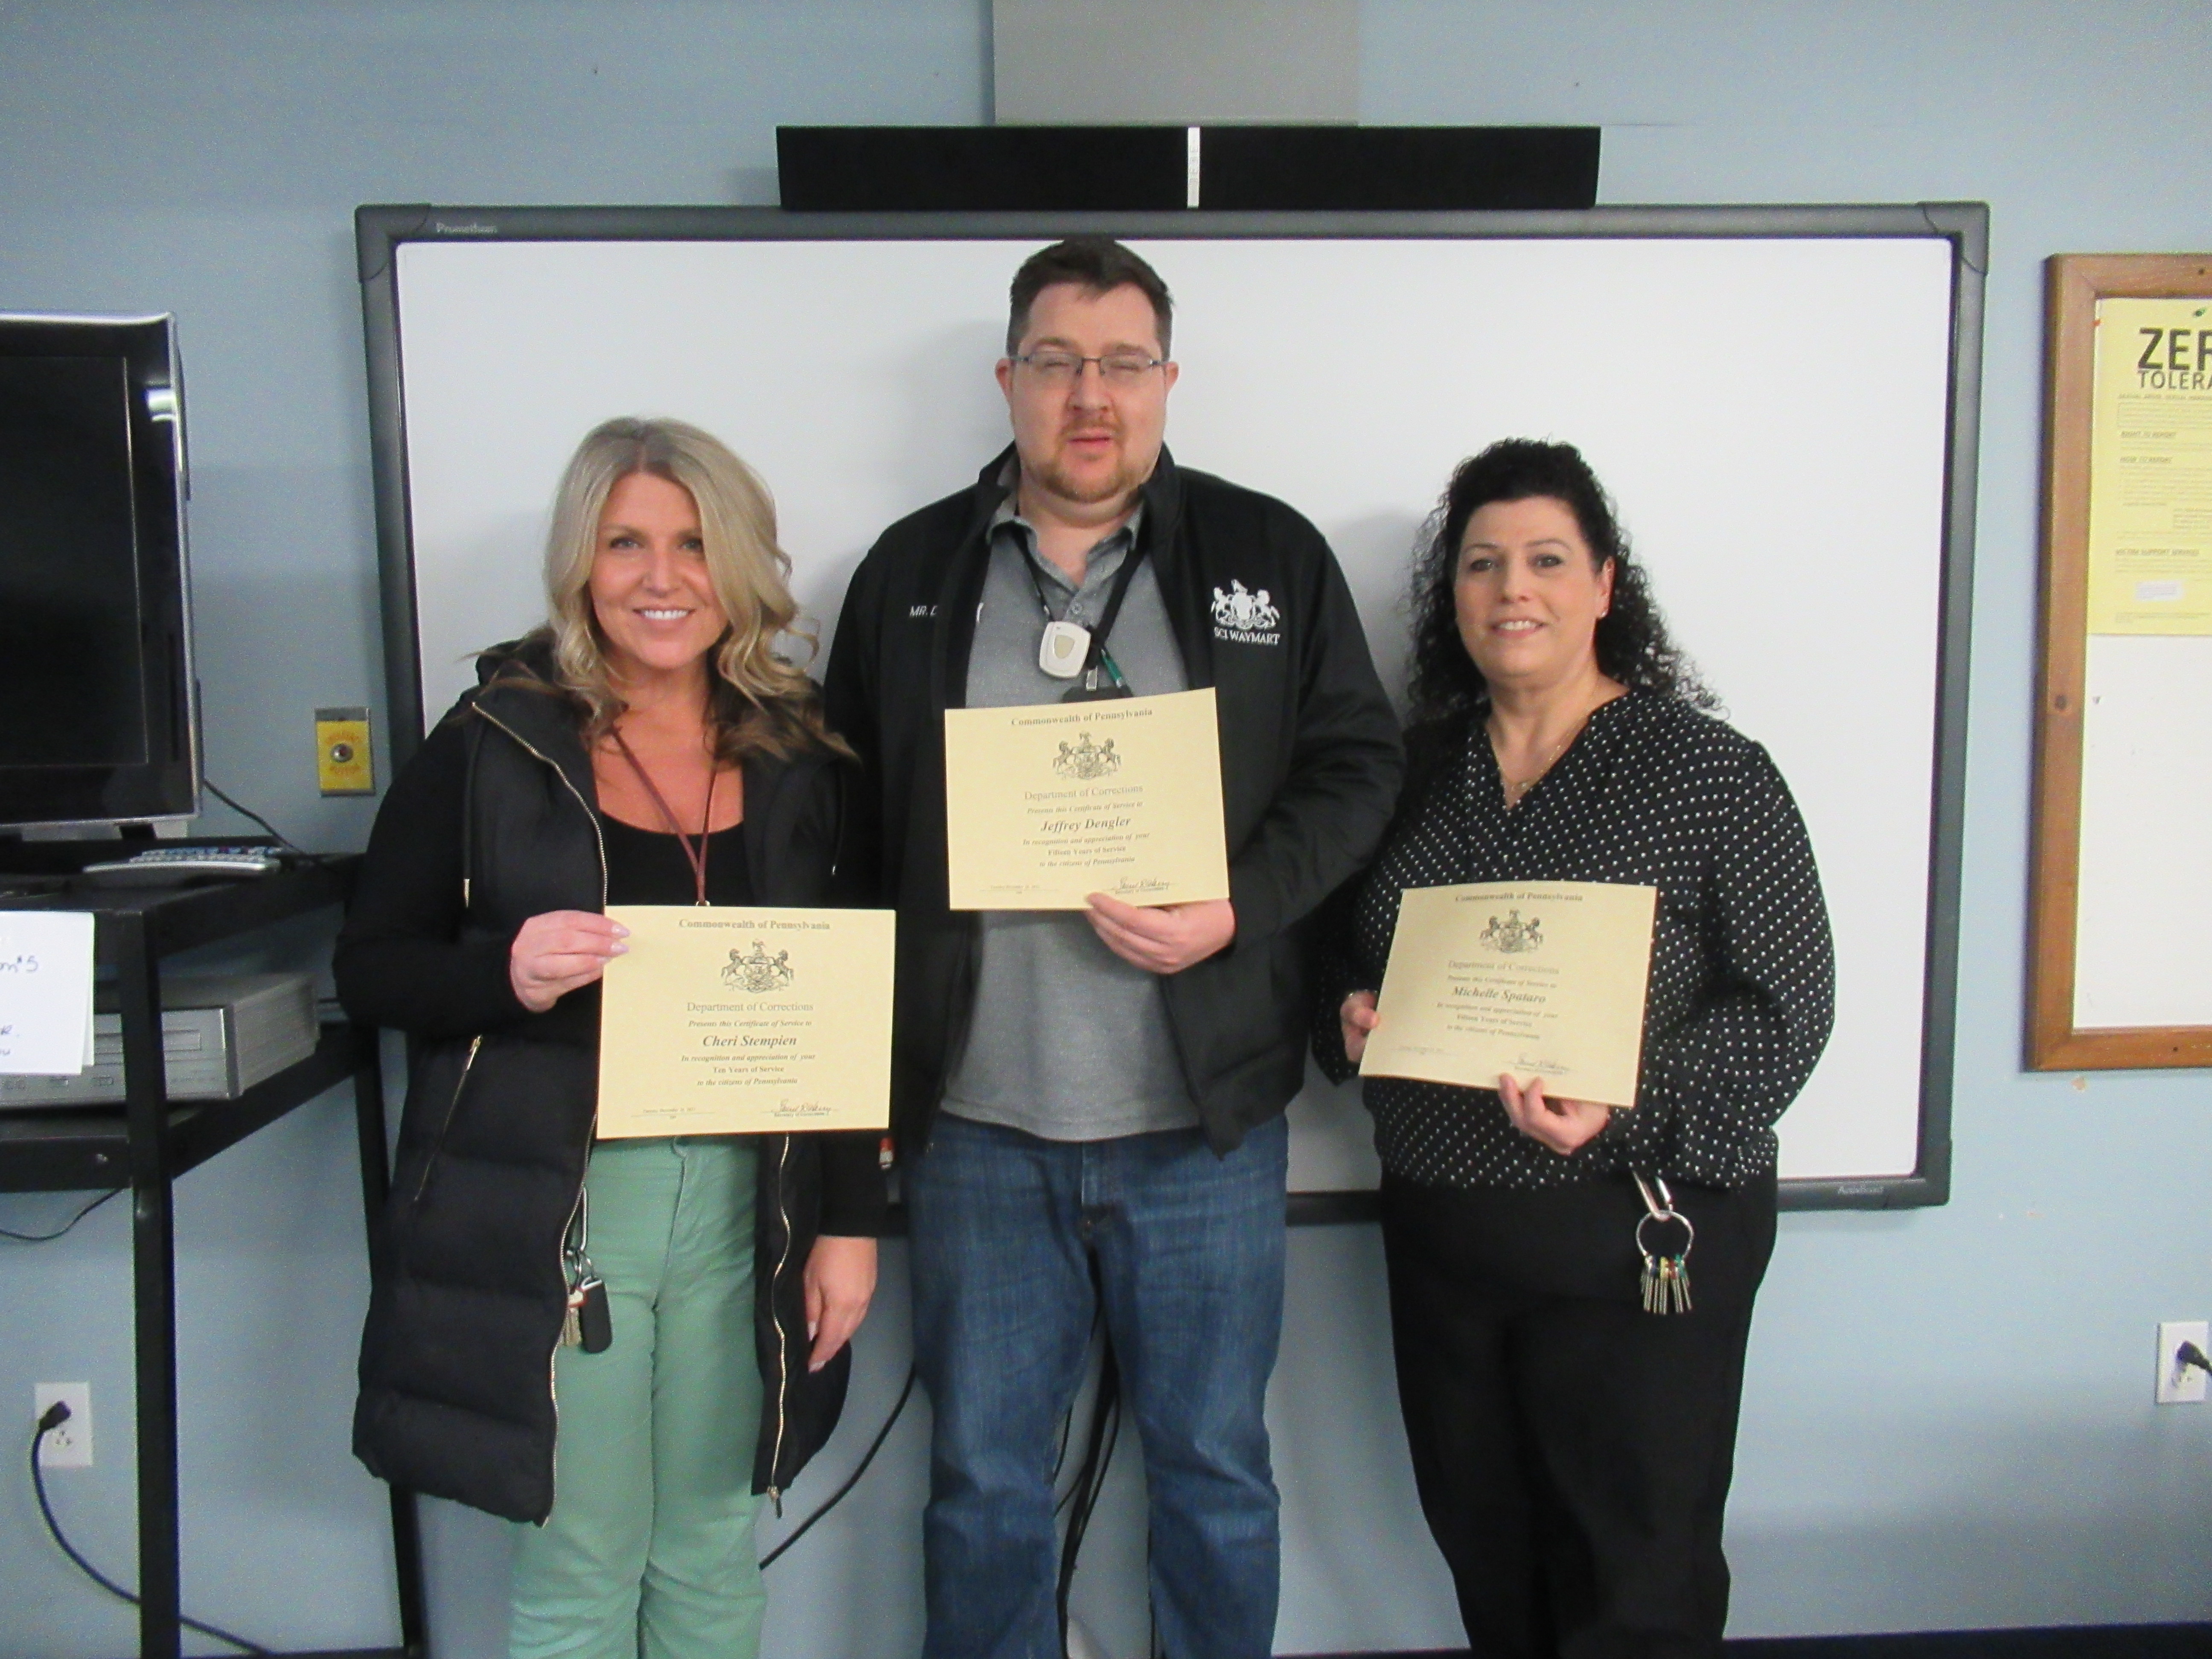 Psychology Service Specialist Cheri Stempien, Drug and Alcohol Treatment Specialist Jeffrey Dengler, and Counselor Michelle Spat